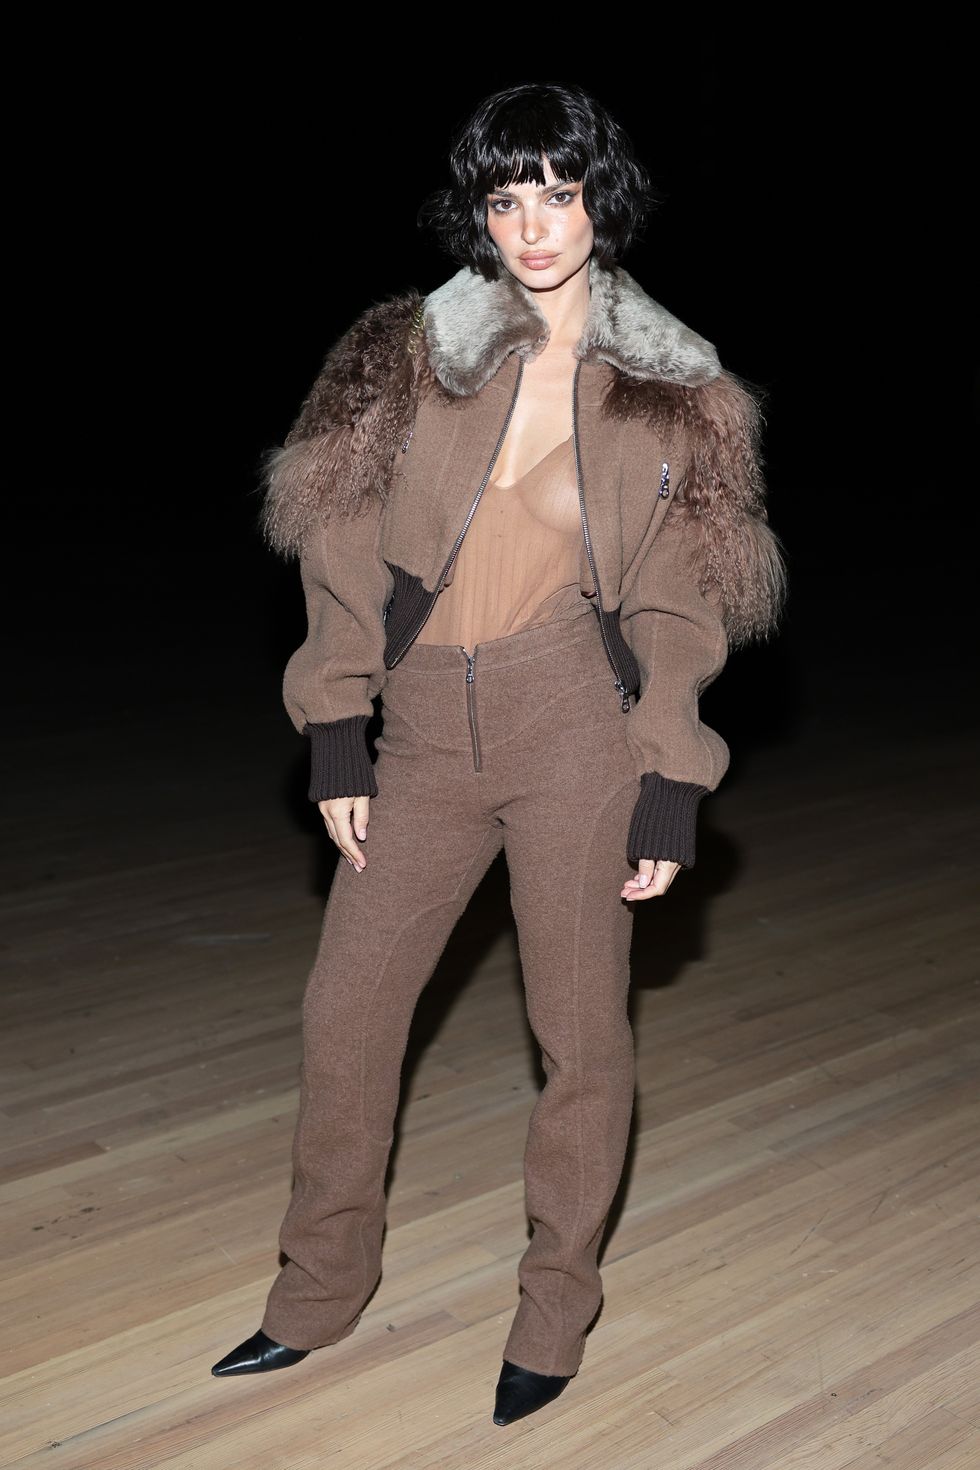 new york, new york february 02 emily ratajkowski attends the marc jacobs runway show 2023 at the park avenue armory on february 02, 2023 in new york city photo by dimitrios kambourisgetty images for marc jacobs